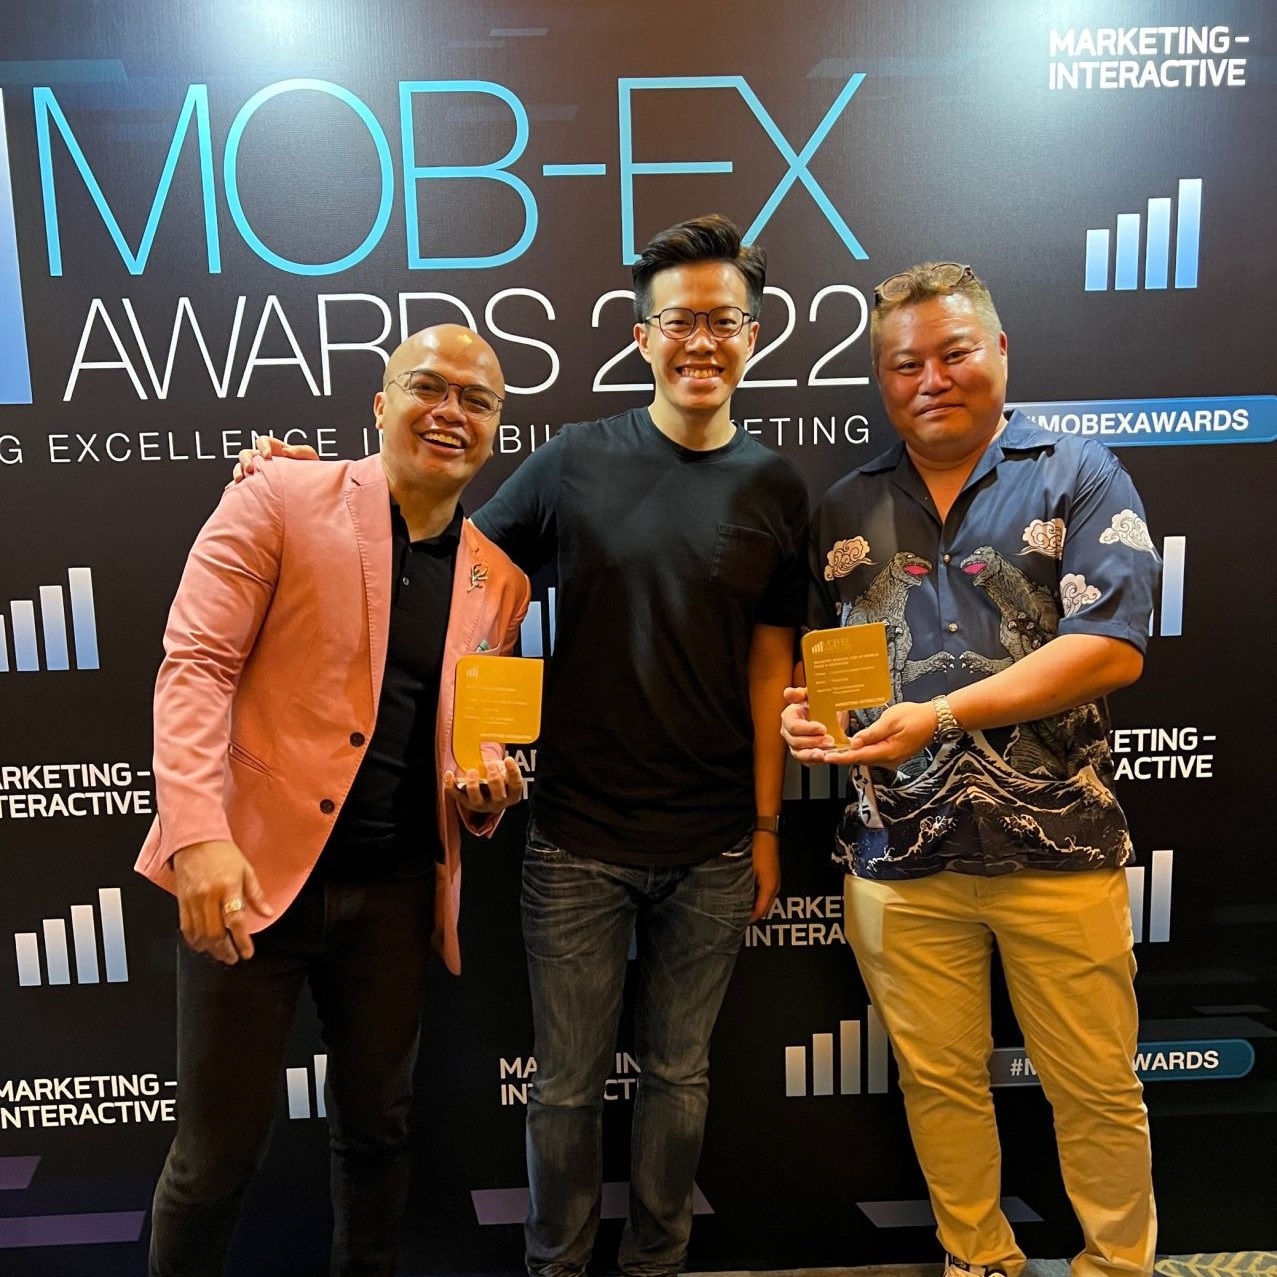 Marketing Interactives Mob Ex Awards 2022 in Singapore